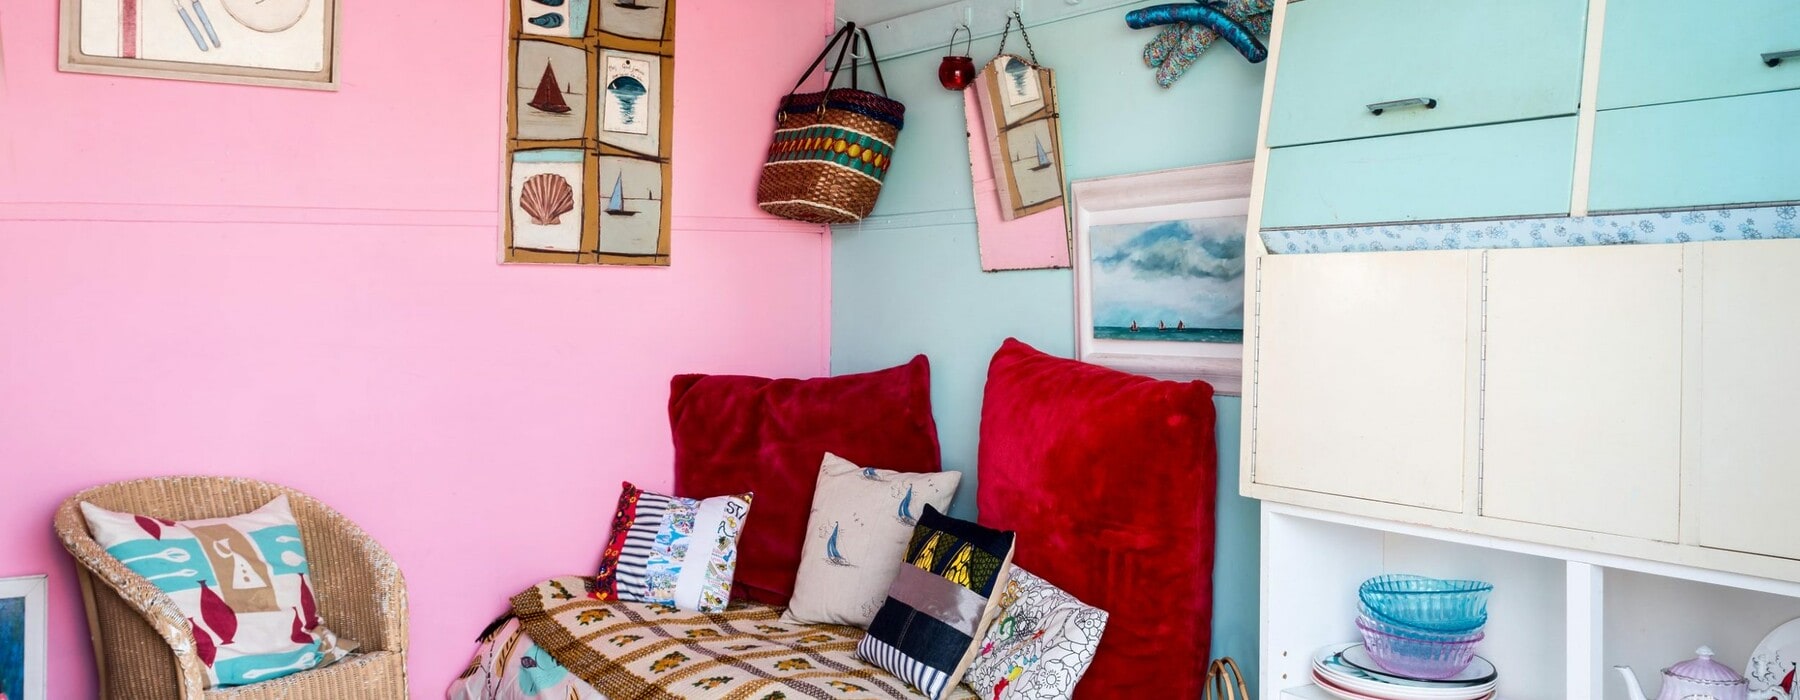 Pink and blue painted bedroom with an assortment of second-hand decor items, furniture and plates